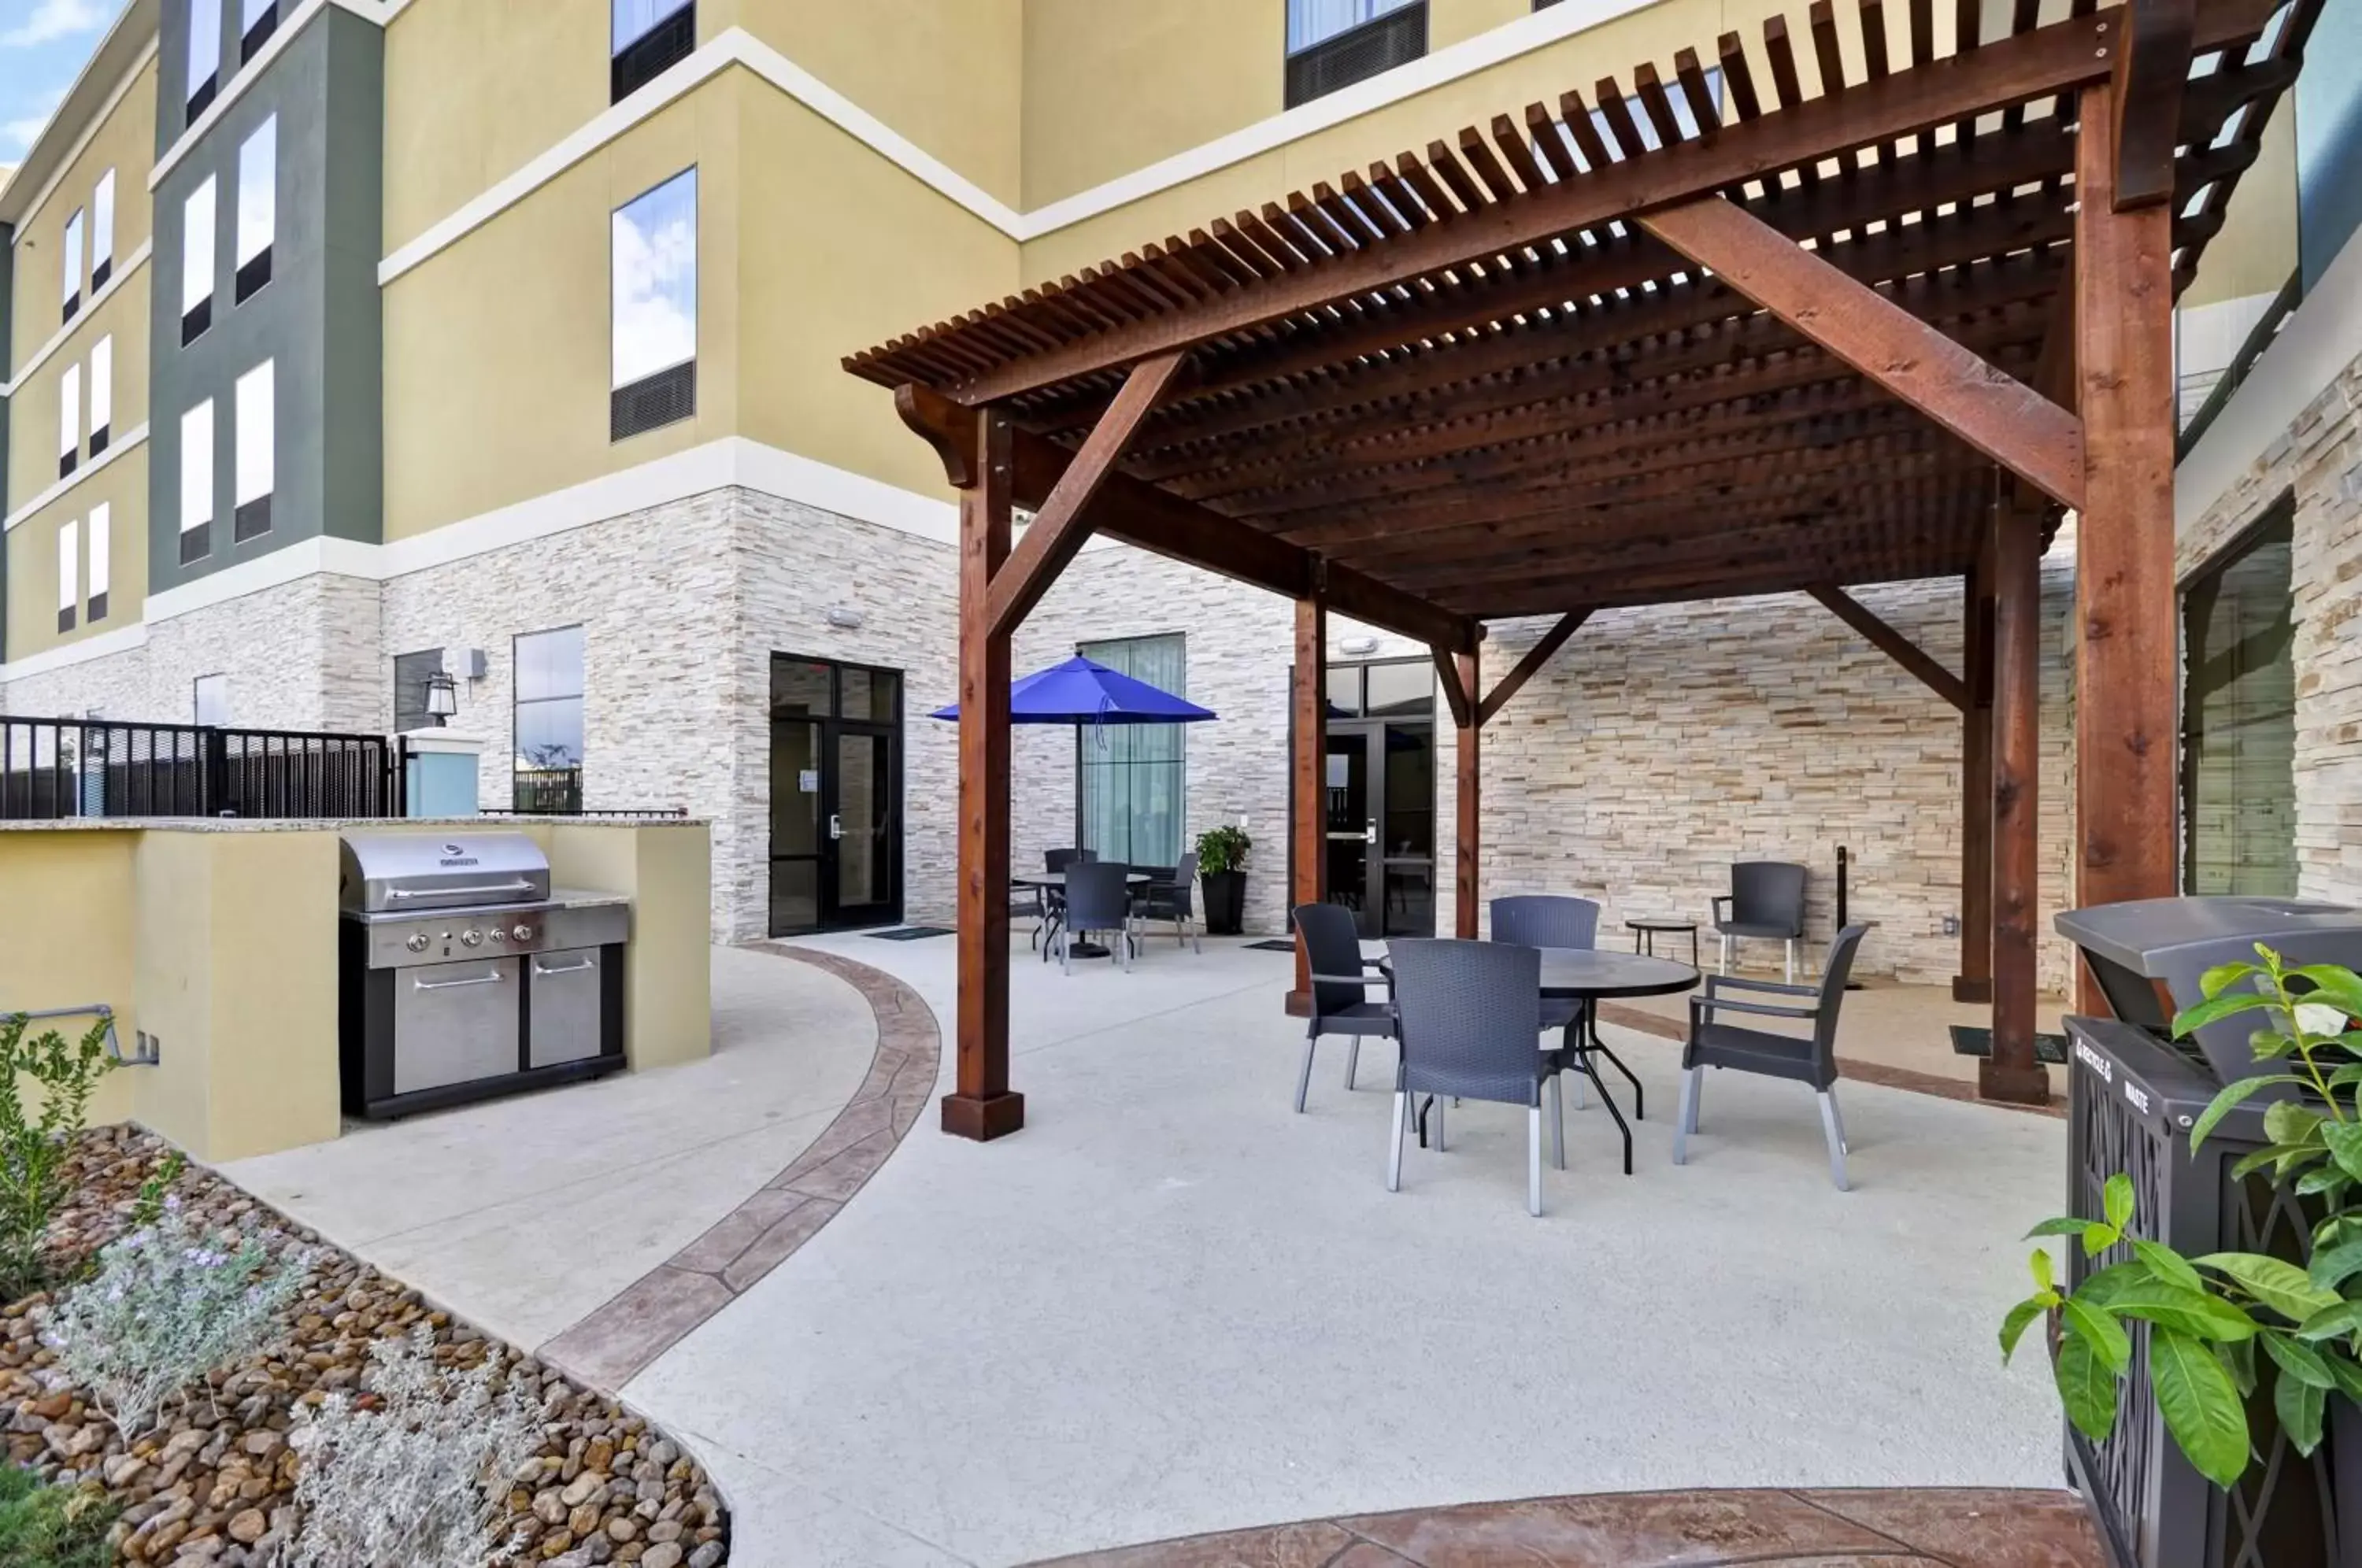 Property building in Homewood Suites by Hilton New Braunfels